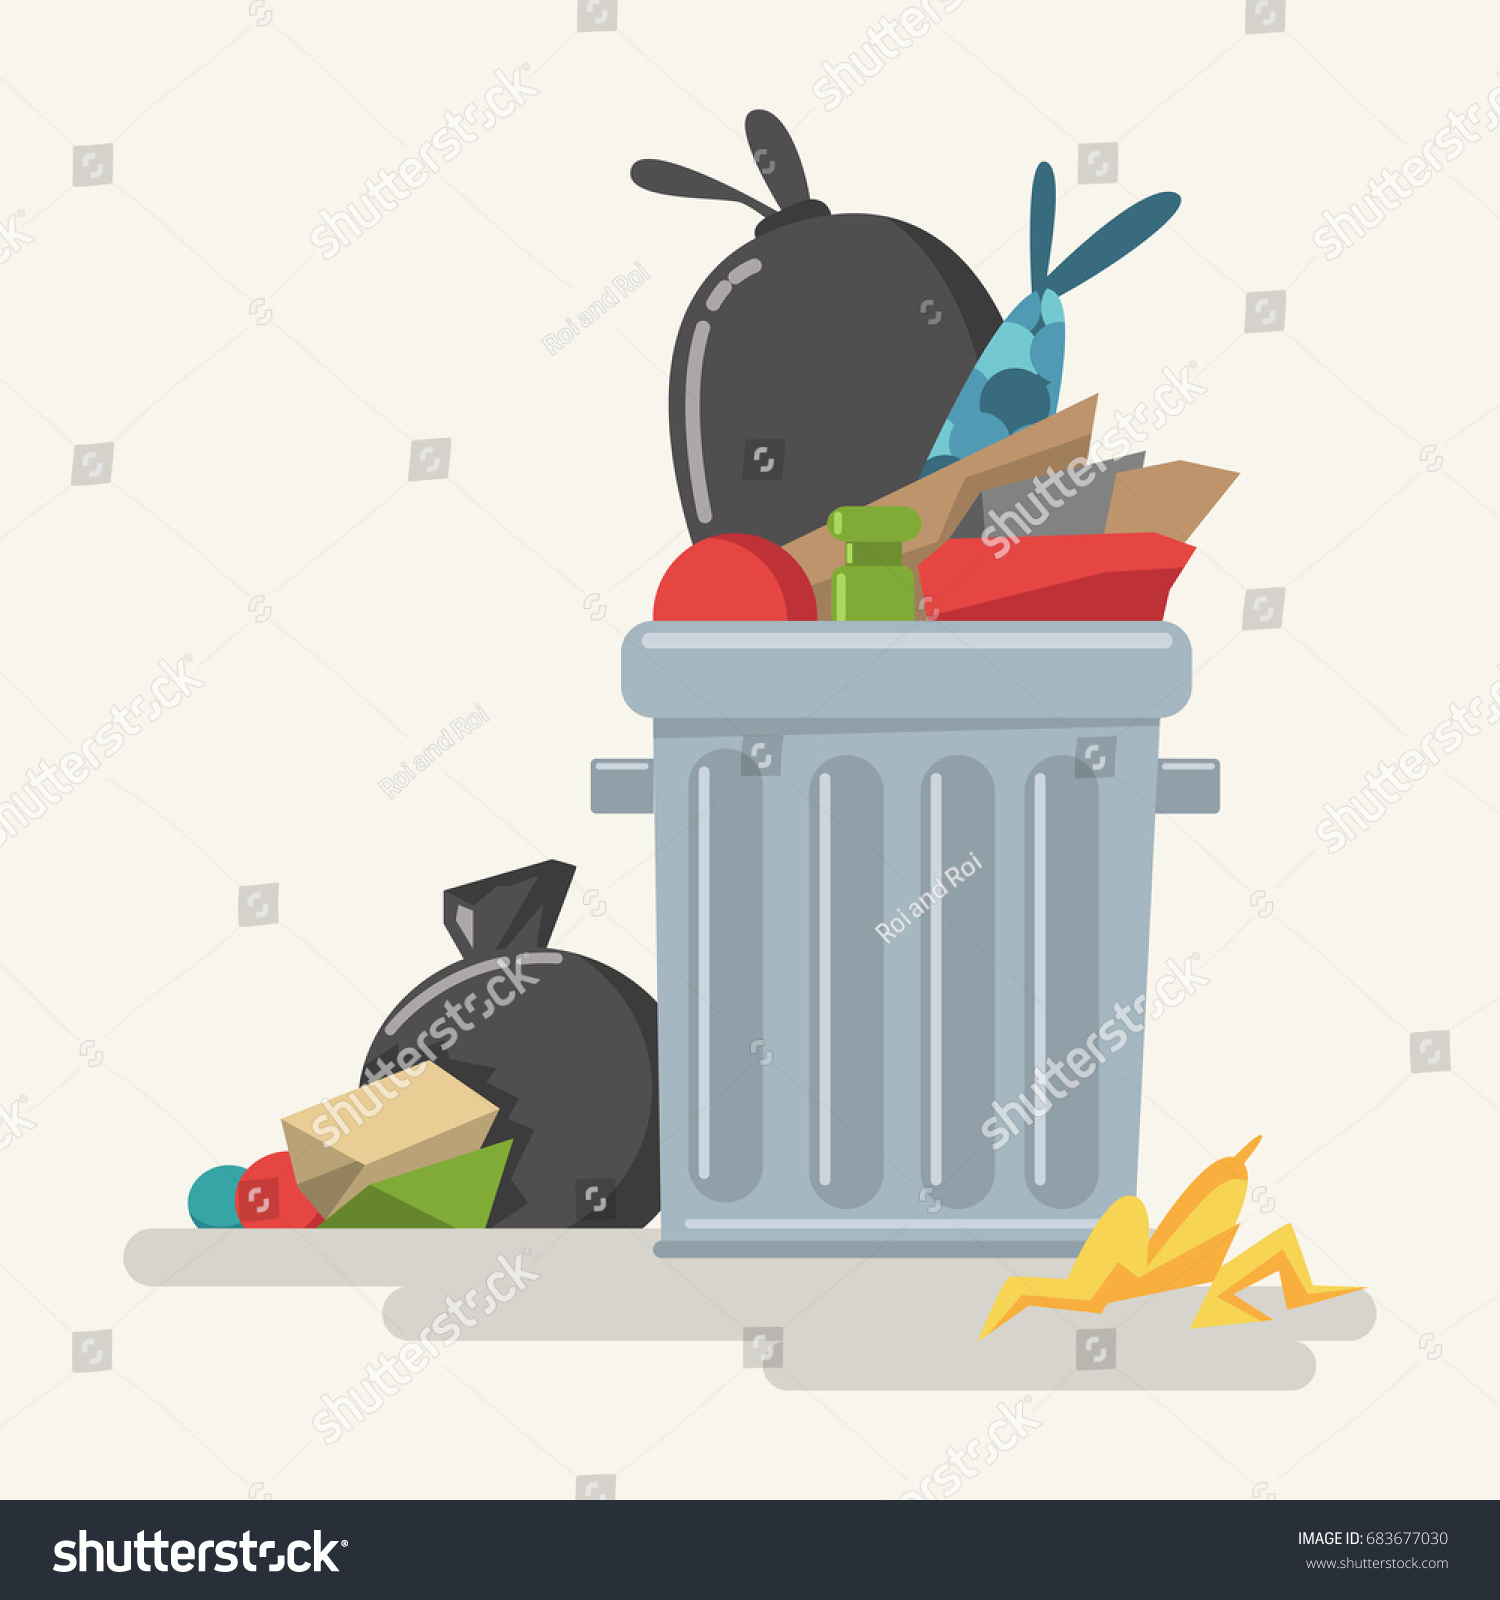 Garbage Can Waste Plastic Bags Trash Stock Vector 683677030 - Shutterstock